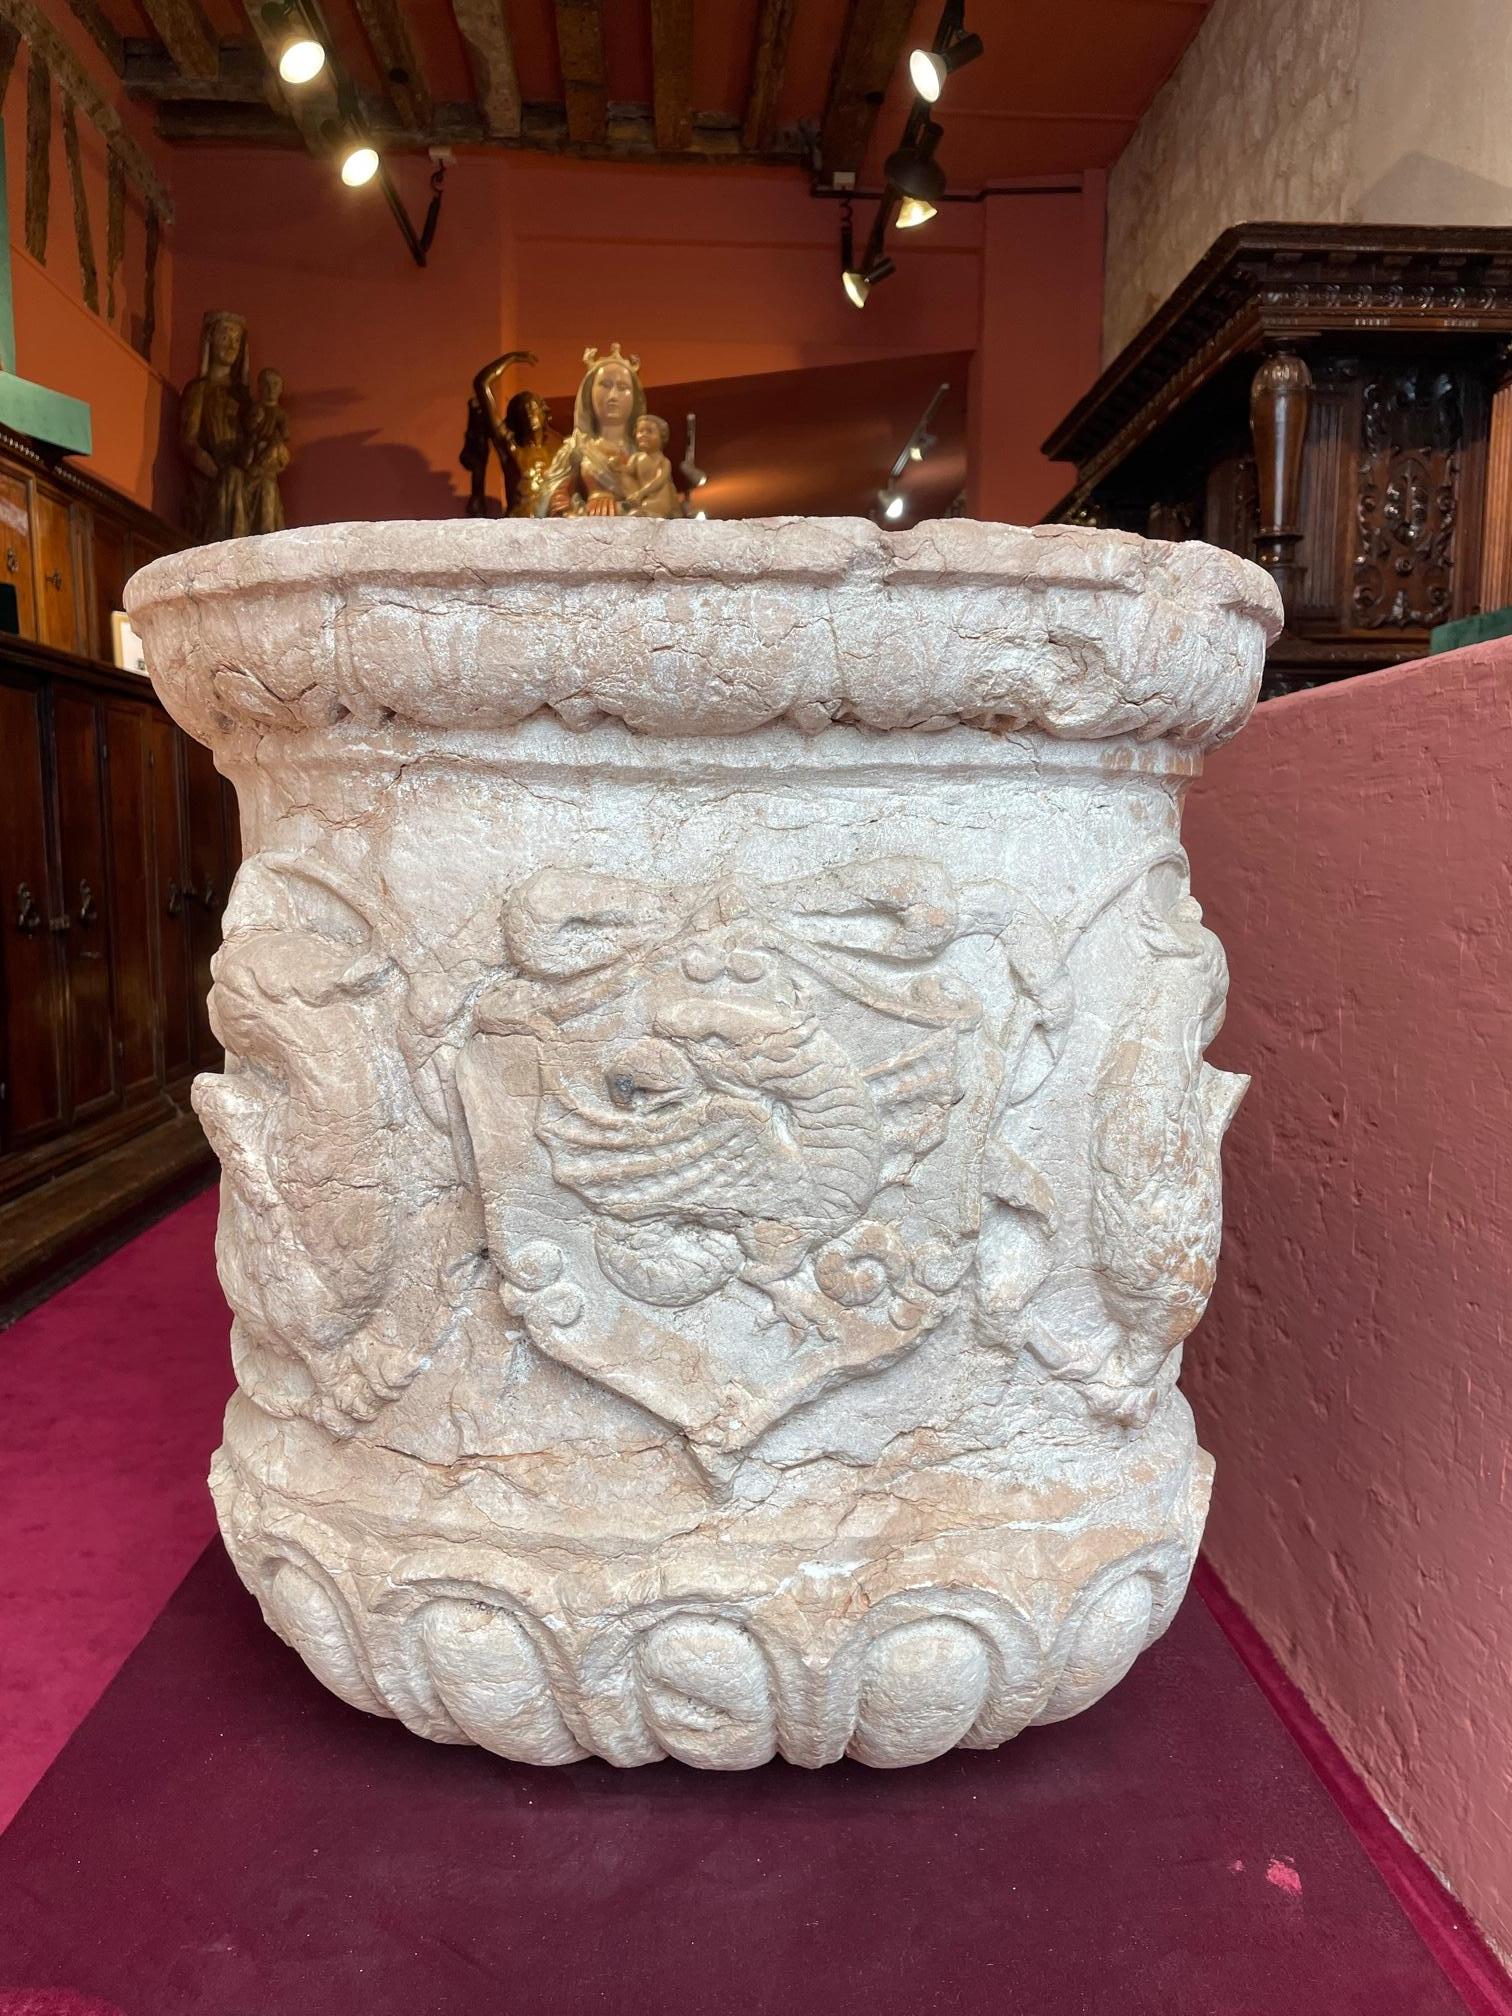 IMPORTANT ITALIAN RENAISSANCE GARDENER

ORIGIN: NORTHERN ITALY
PERIOD: 16th CENTURY

Height: 52 cm
Length: 130 cm
Depth: 53 cm

Verona marble


Taking the form of an antique sarcophagus, this architectural element is adorned with powerful and